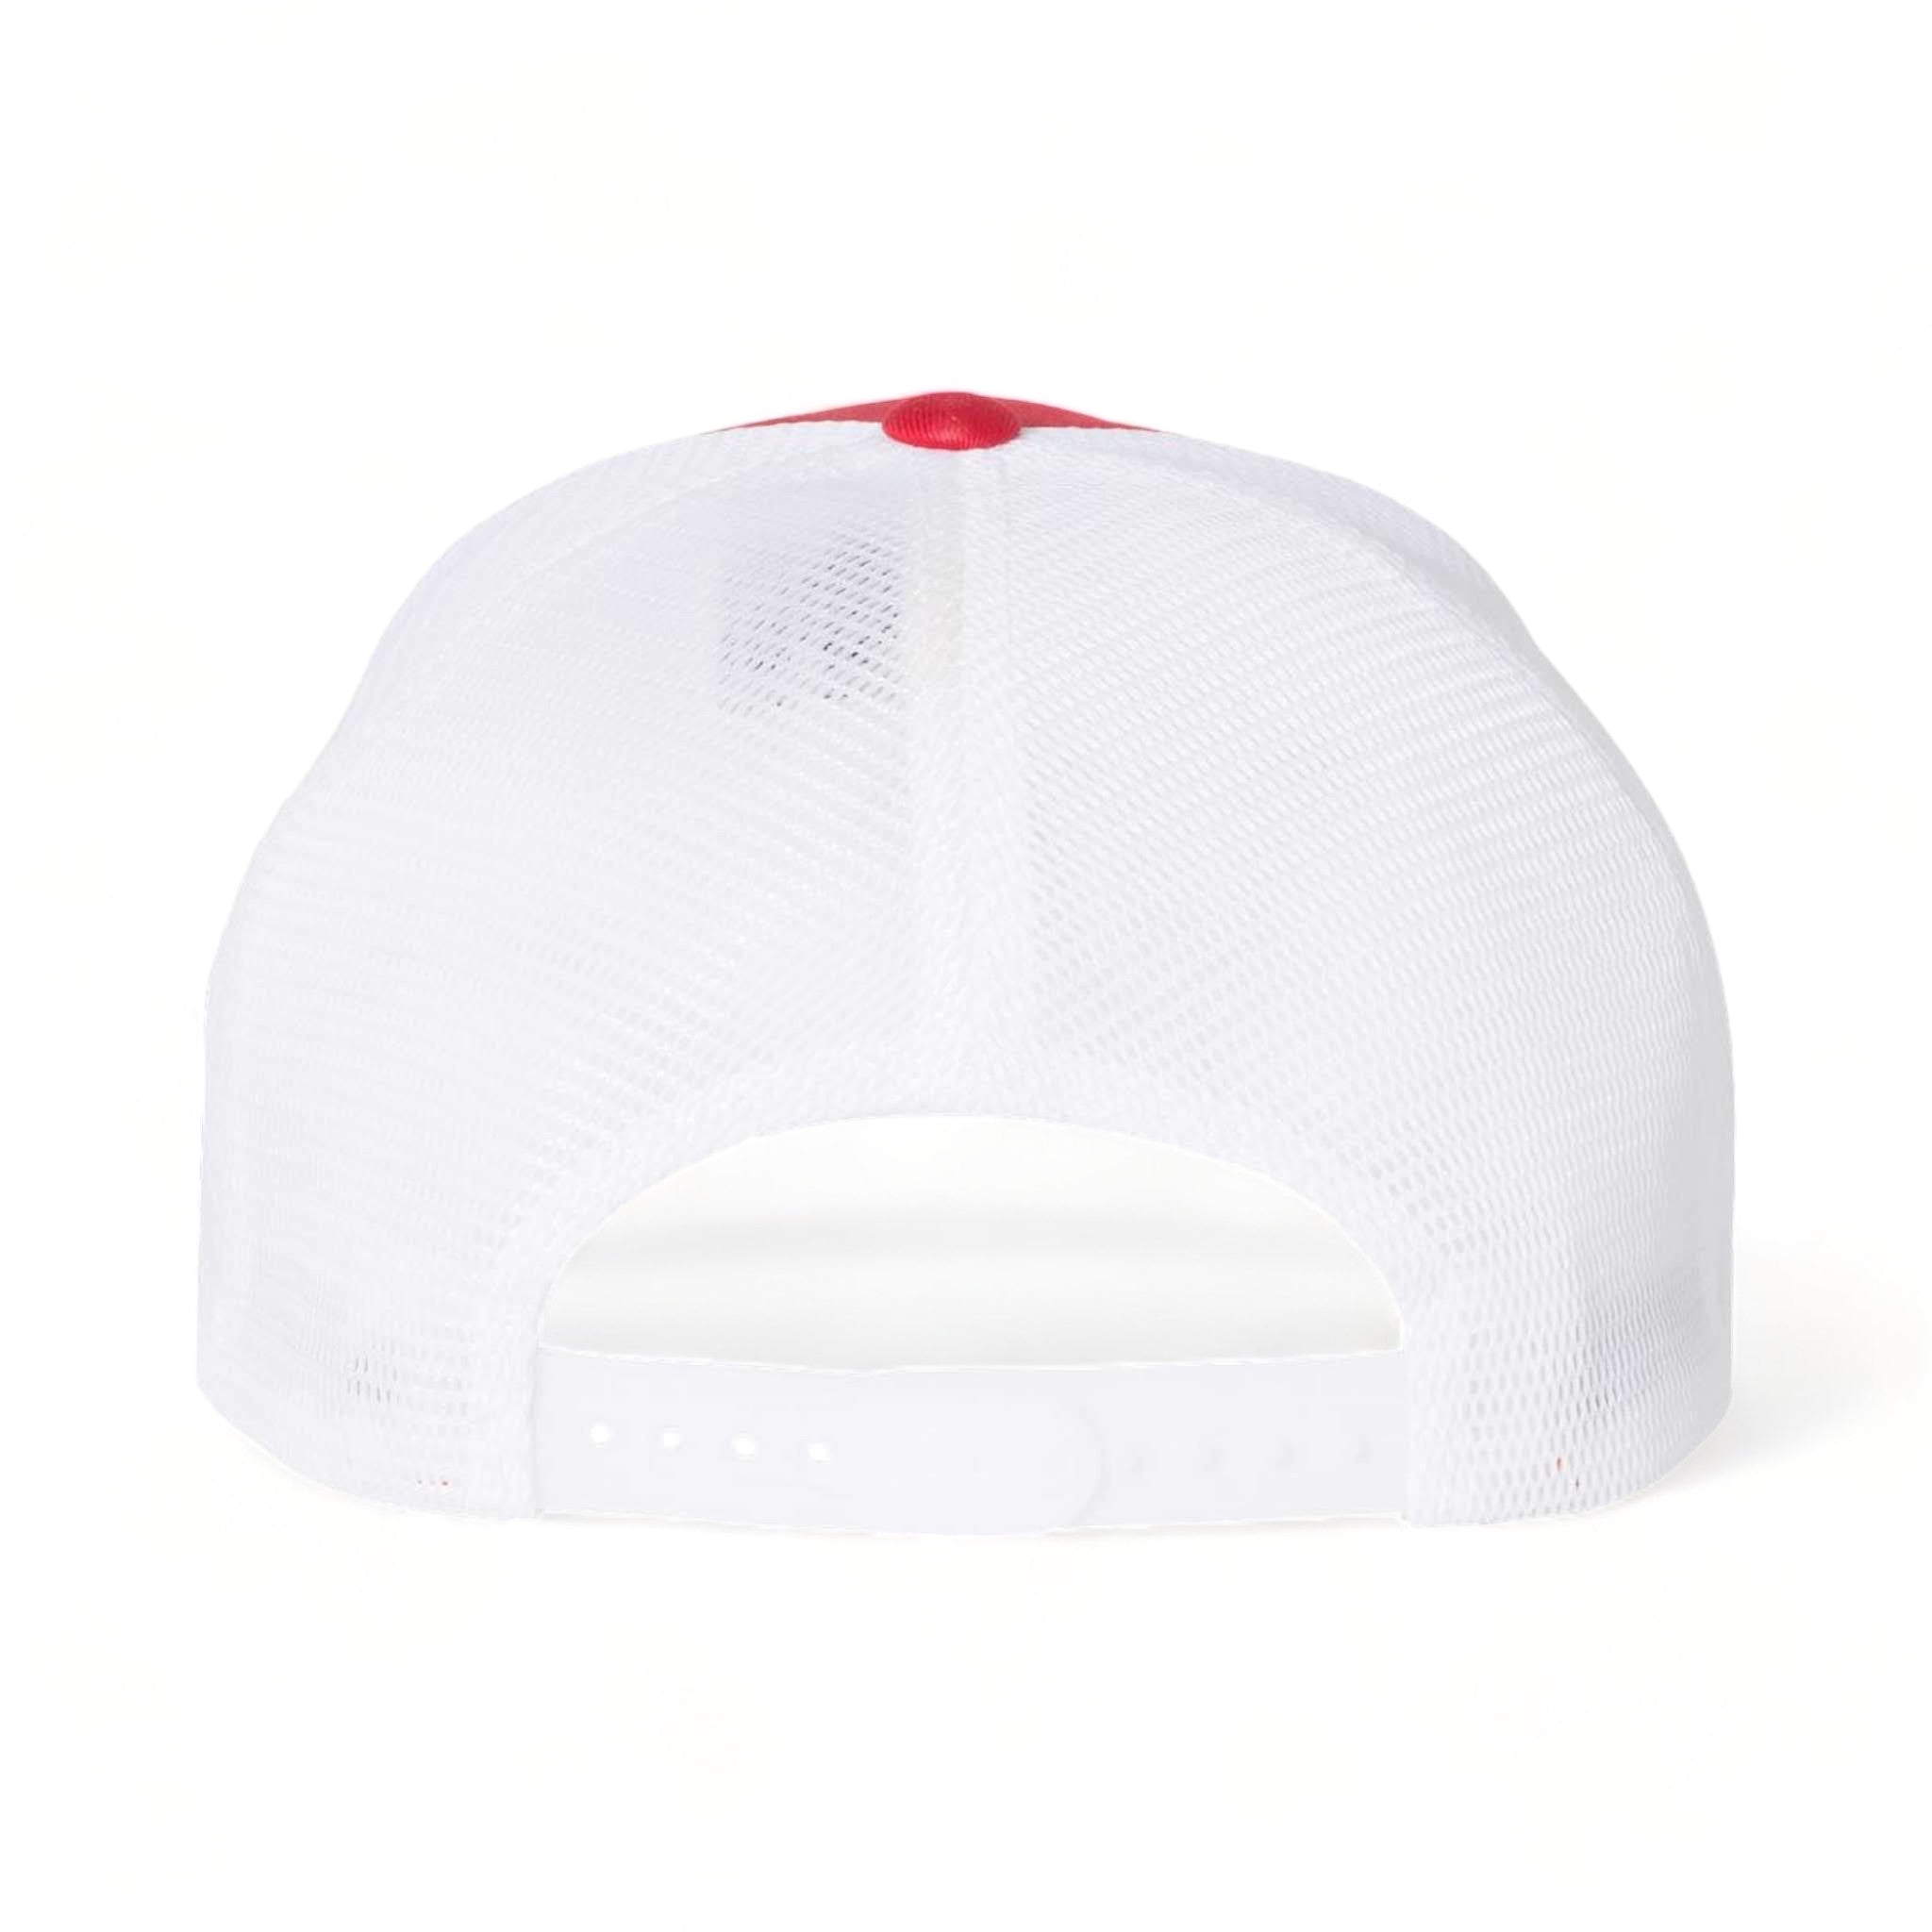 Back view of Flexfit 110M custom hat in red and white